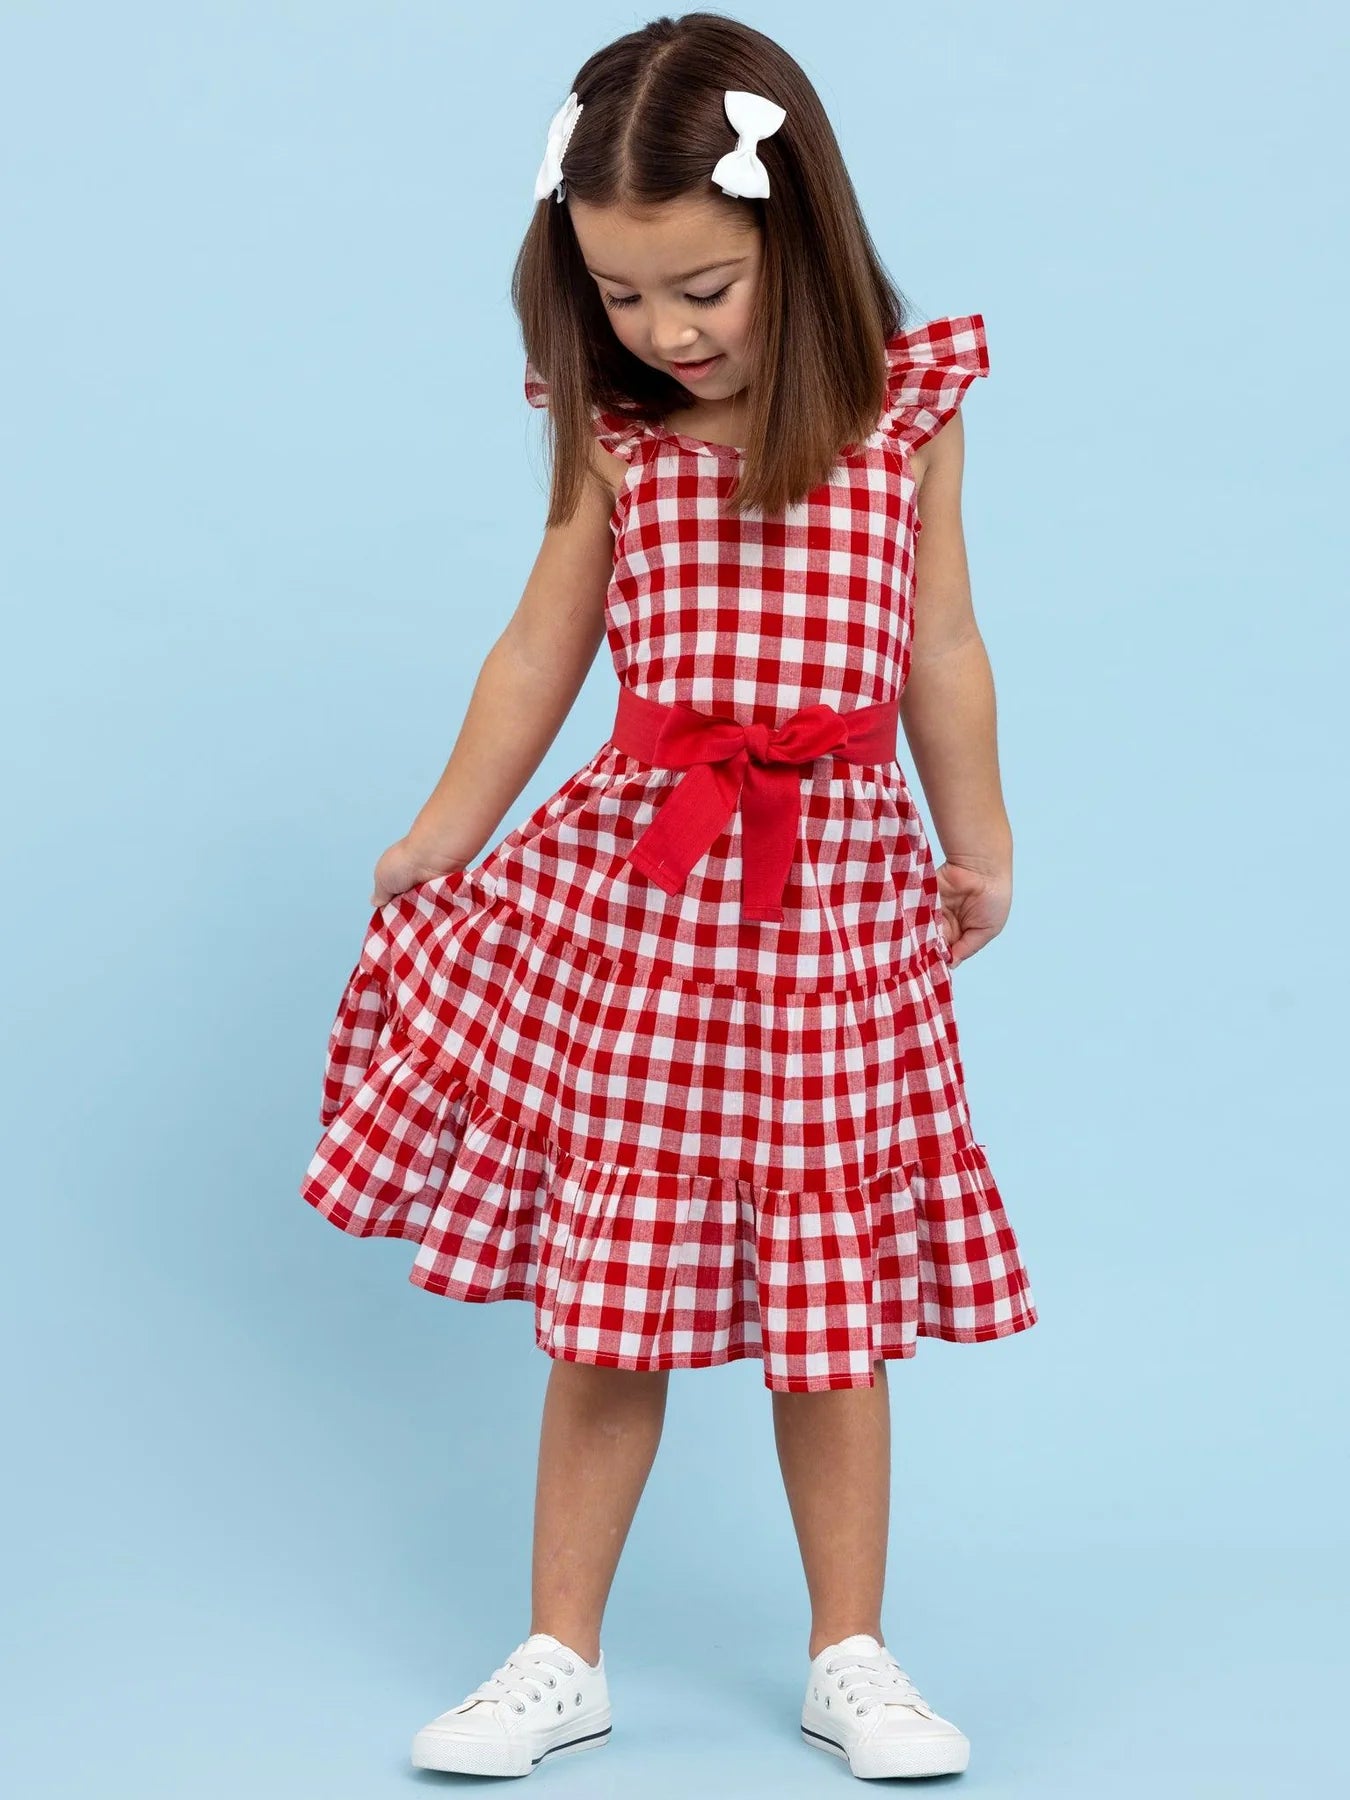 How Did Gingham Get So Popular? Ask the Wizard